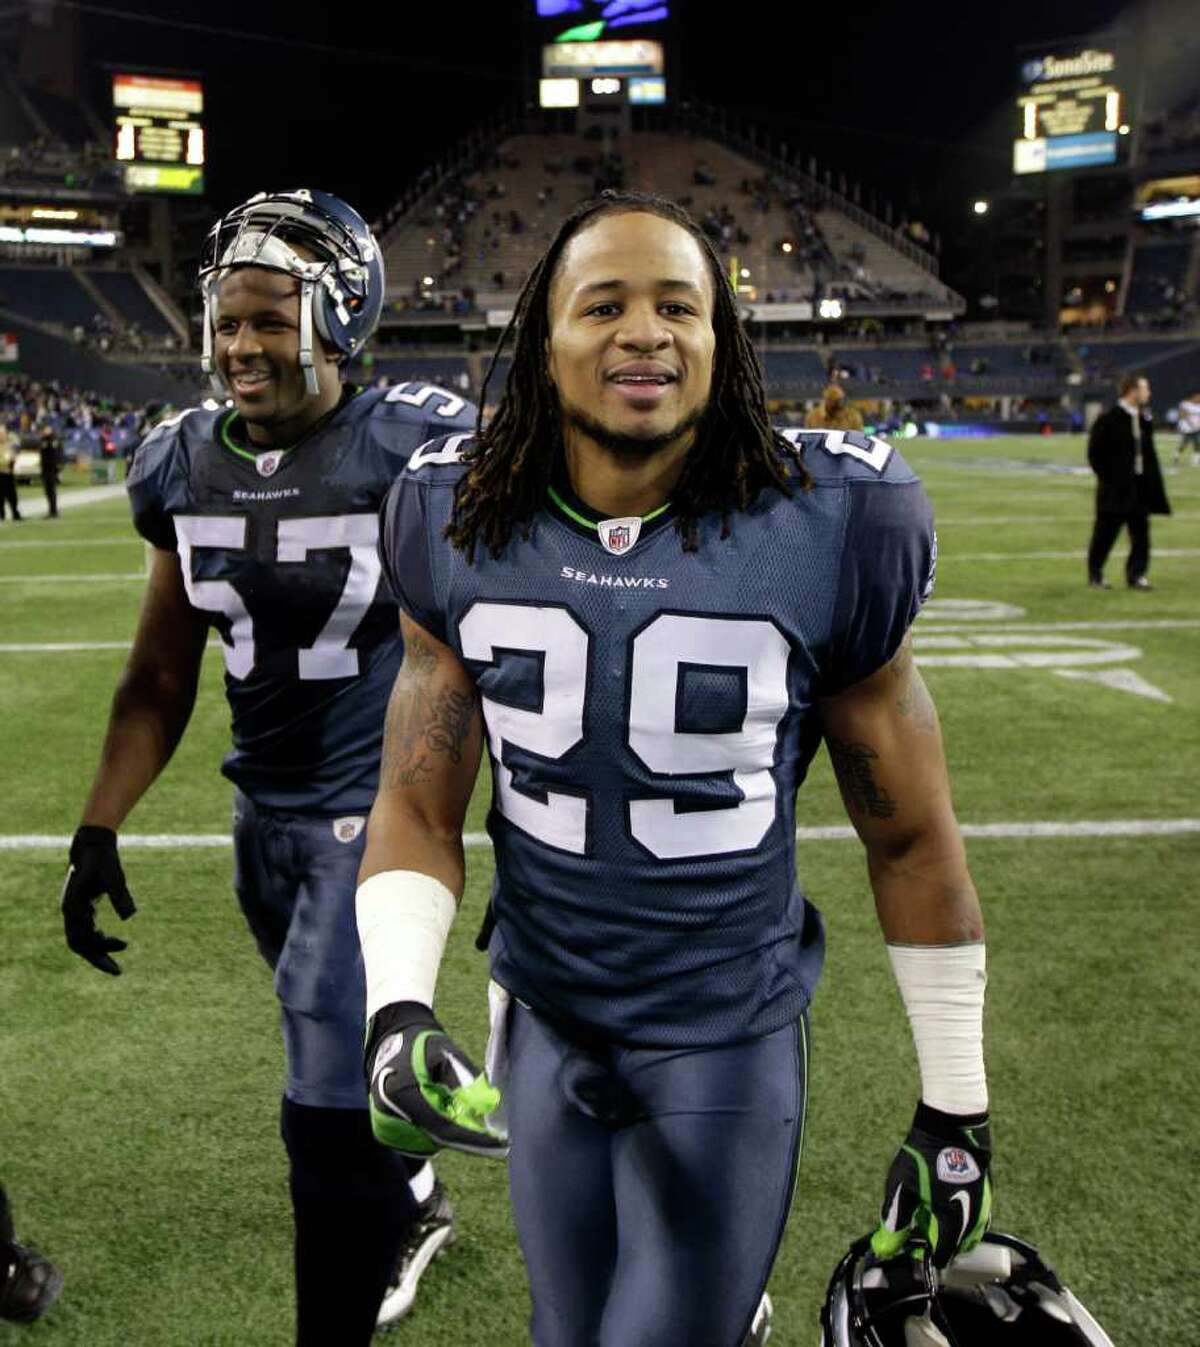 Seattle Seahawks' Earl Thomas, front, and David Hawthorne walk off the field after the Seahawks beat the Philadelphia Eagles 31-14 in an NFL football game Thursday, Dec. 1, 2011, in Seattle. (AP Photo/Ted S. Warren)